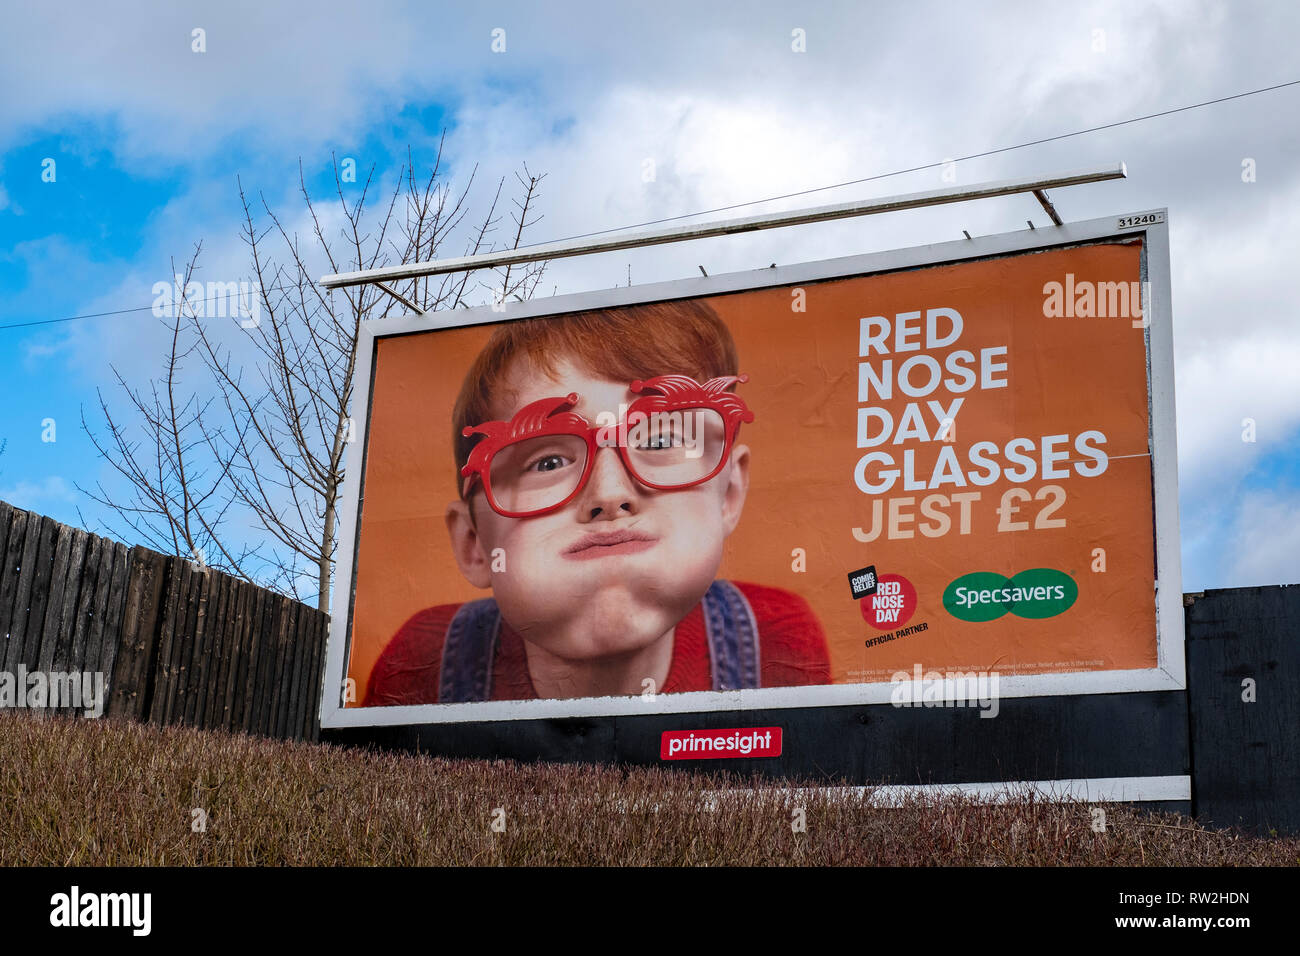 Specsavers billboard with Red nose day glasses advert UK Stock Photo